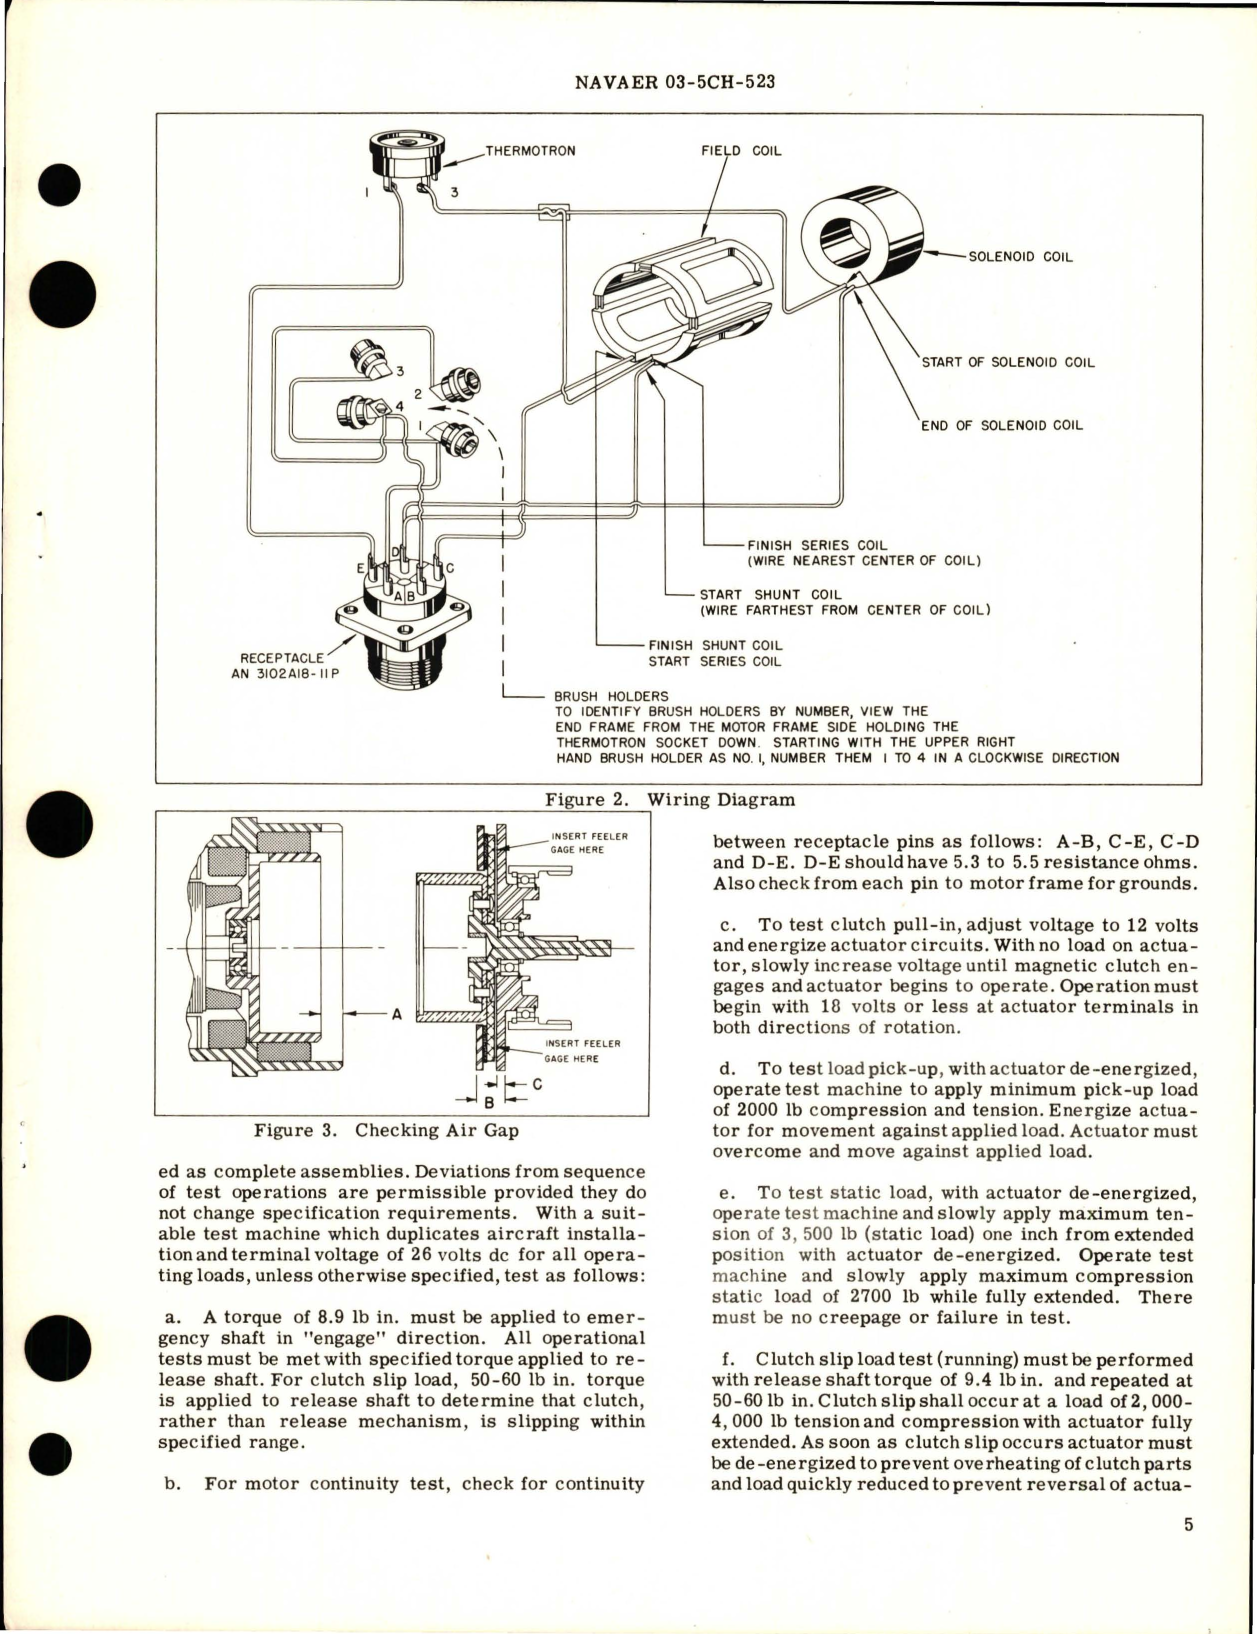 Sample page 5 from AirCorps Library document: Overhaul Instructions with Parts Breakdown for Actuator - Model A7621-3 and A7621-5